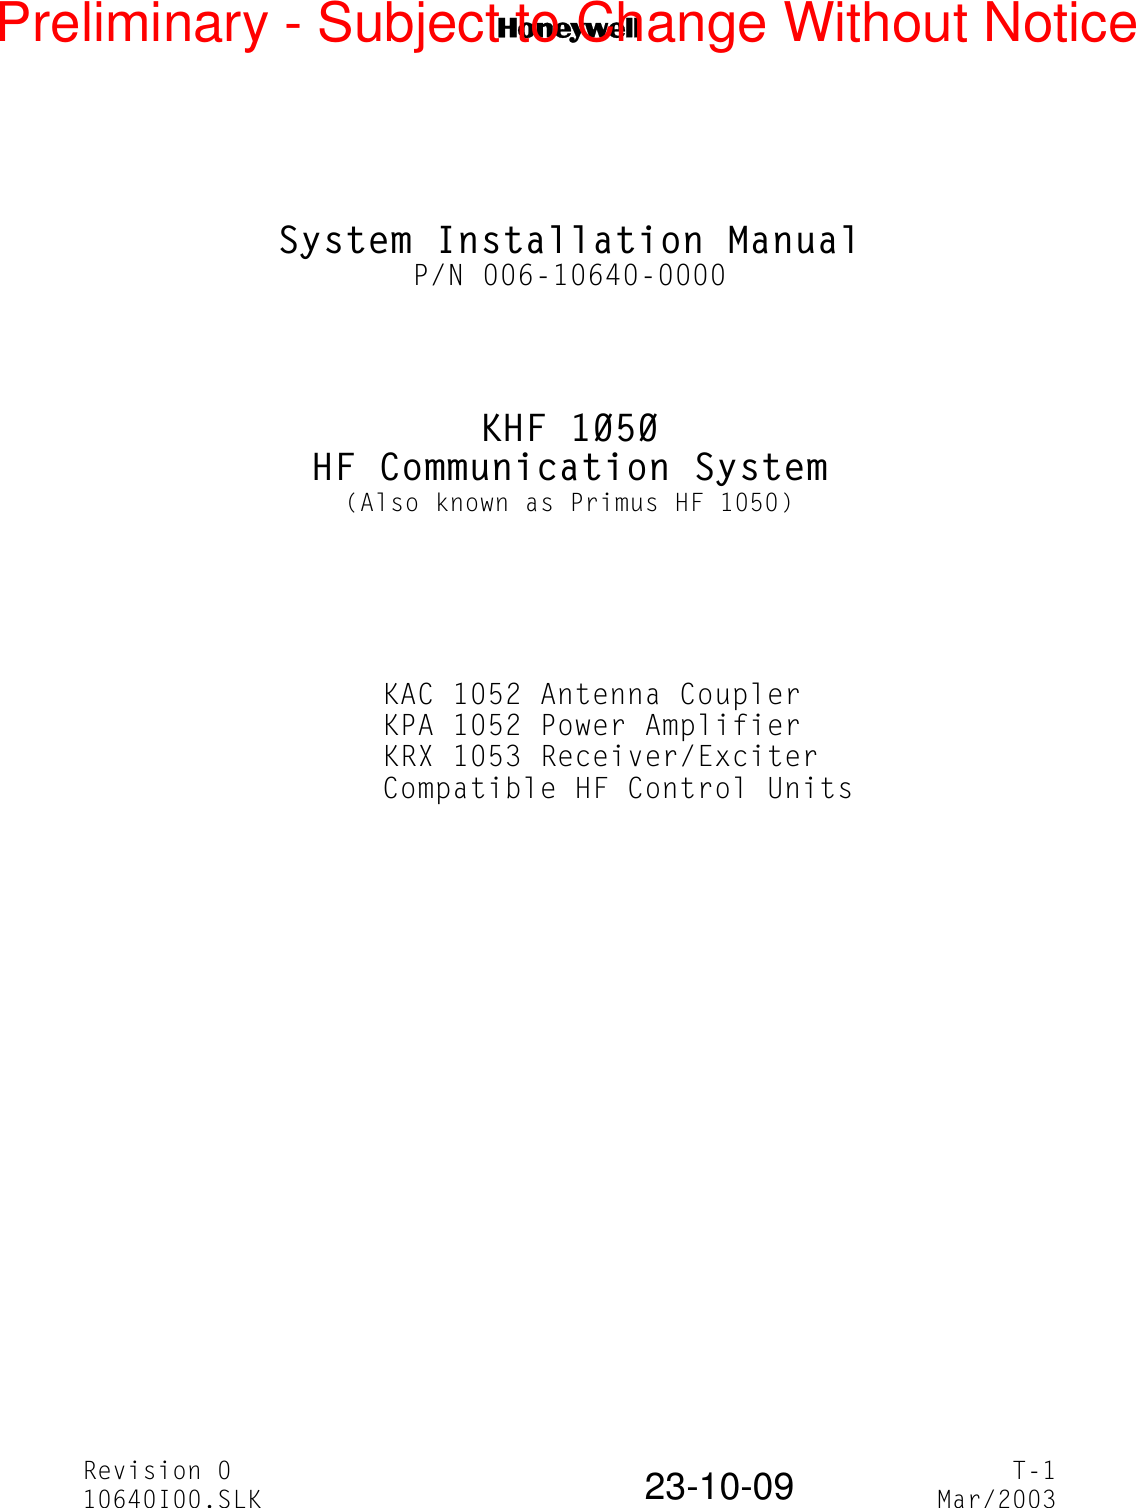 NRevision 0 T-110640I00.SLK Mar/200323-10-09System Installation ManualP/N 006-10640-0000KHF 1050HF Communication System(Also known as Primus HF 1050)KAC 1052 Antenna CouplerKPA 1052 Power AmplifierKRX 1053 Receiver/ExciterCompatible HF Control UnitsPreliminary - Subject to Change Without Notice